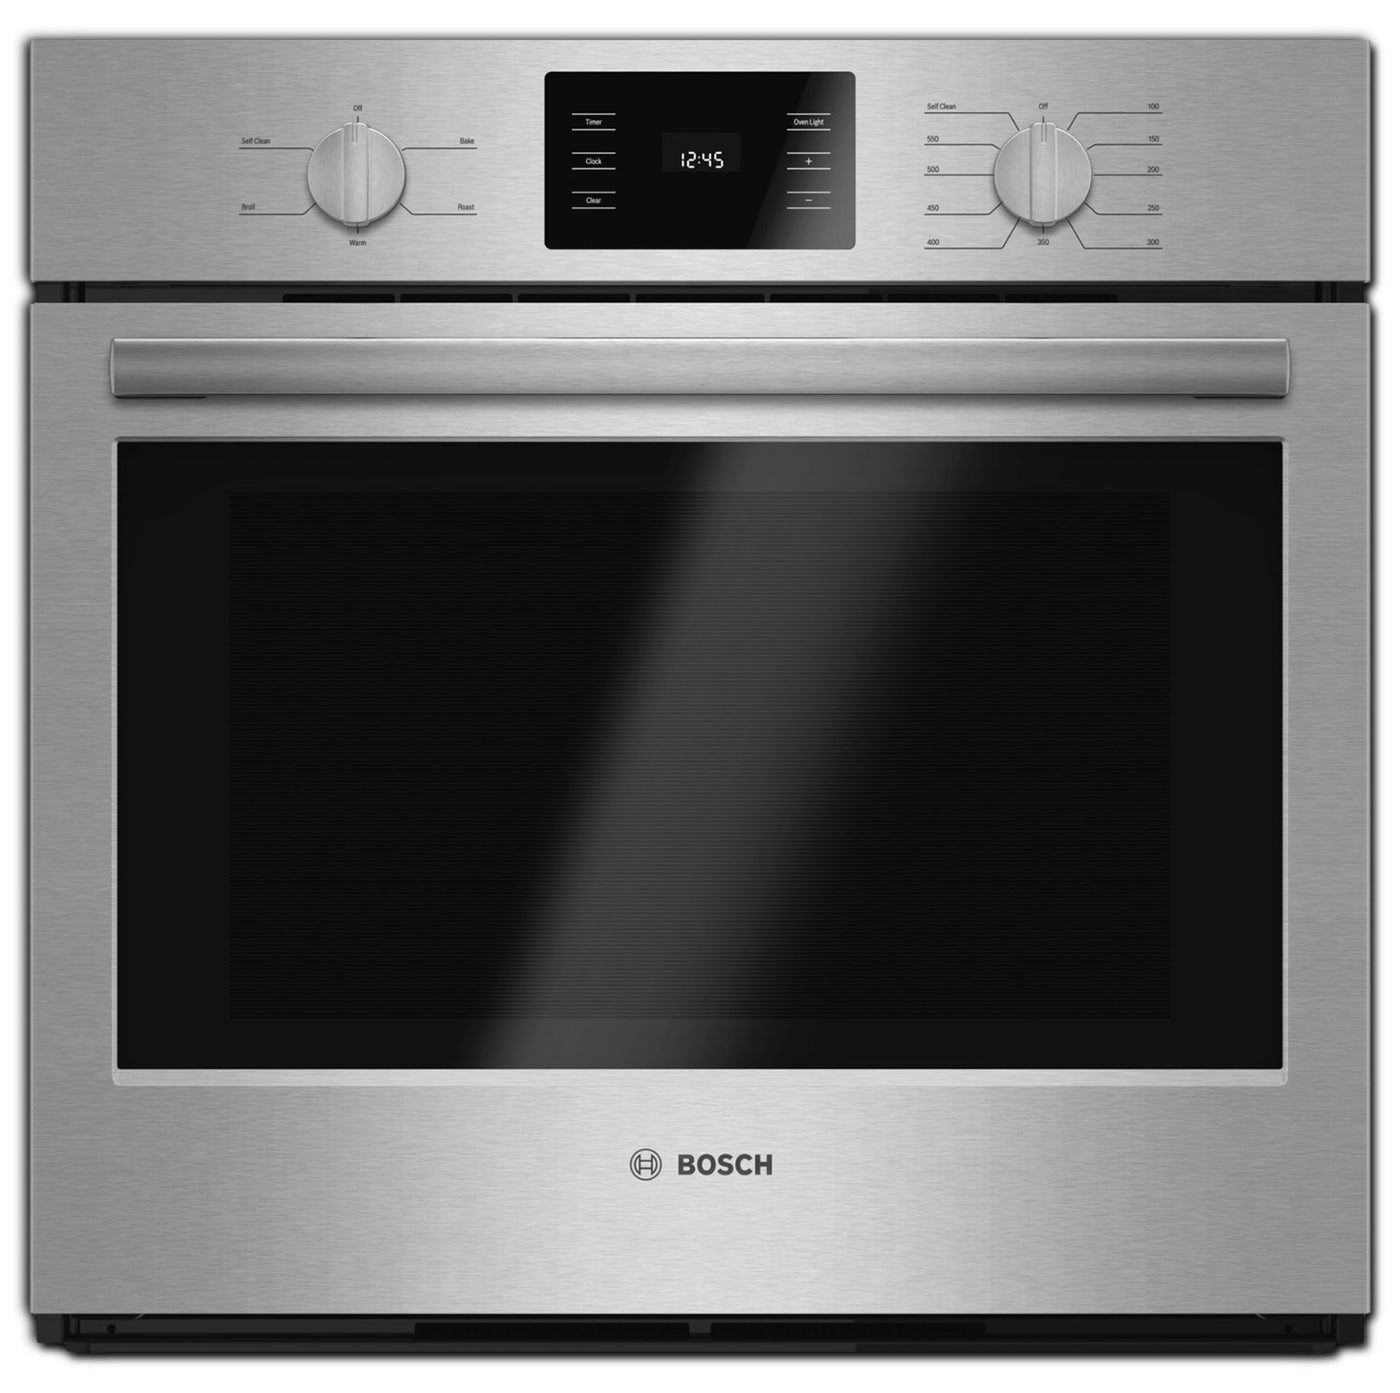 Bosch Stainless Steel Wall Oven (4.6 Cu. Ft.) - 	HBL5351UC